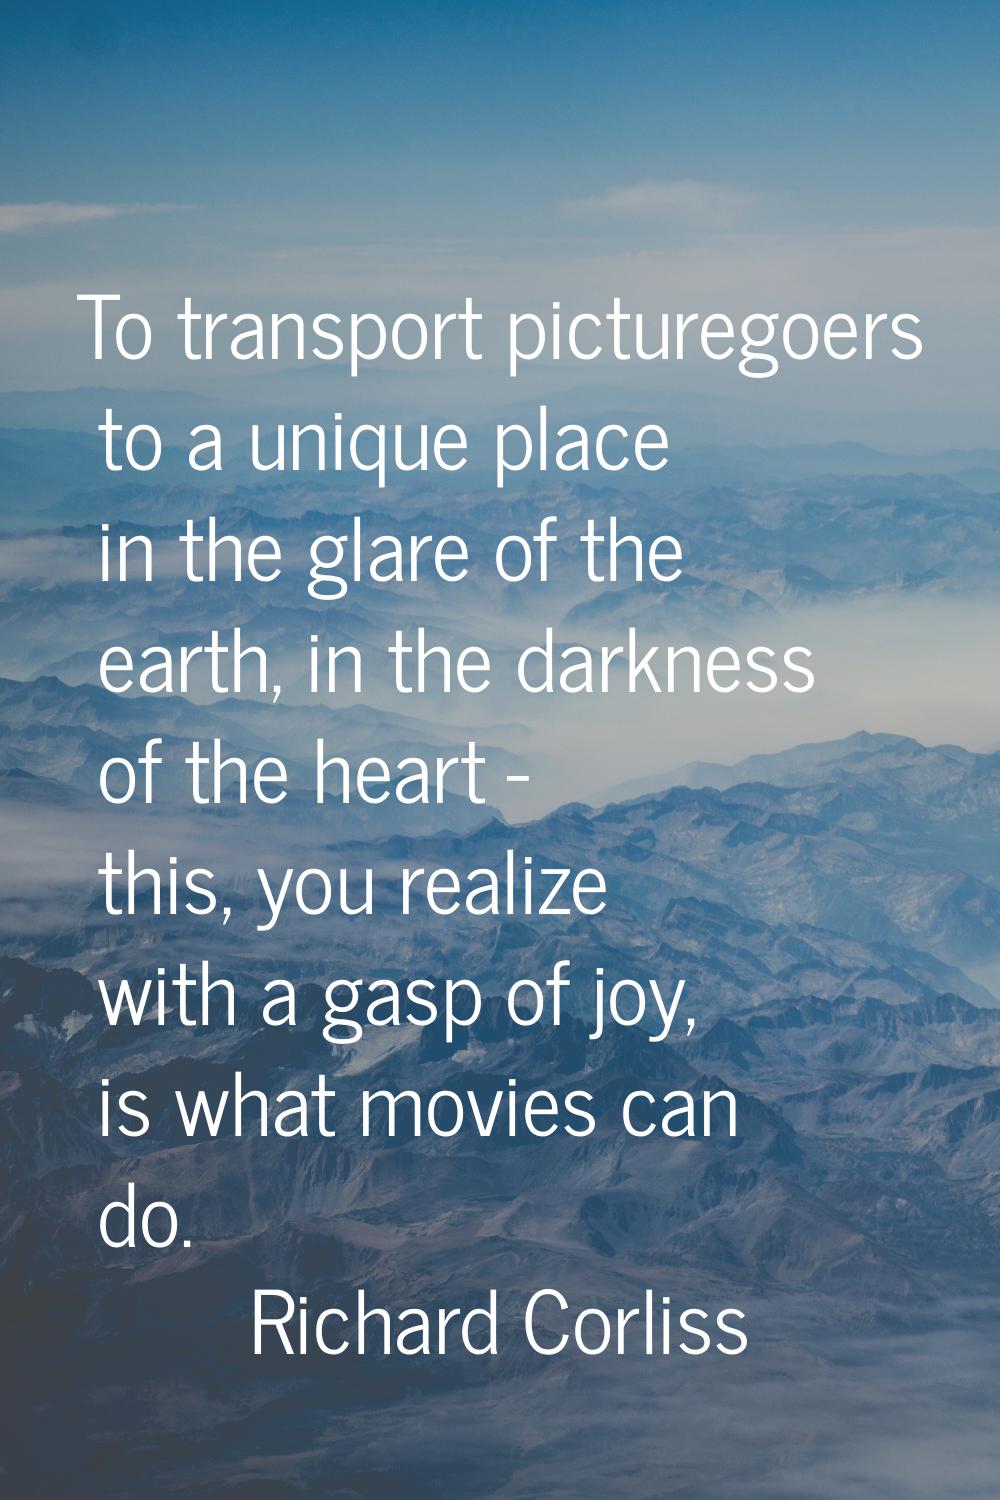 To transport picturegoers to a unique place in the glare of the earth, in the darkness of the heart